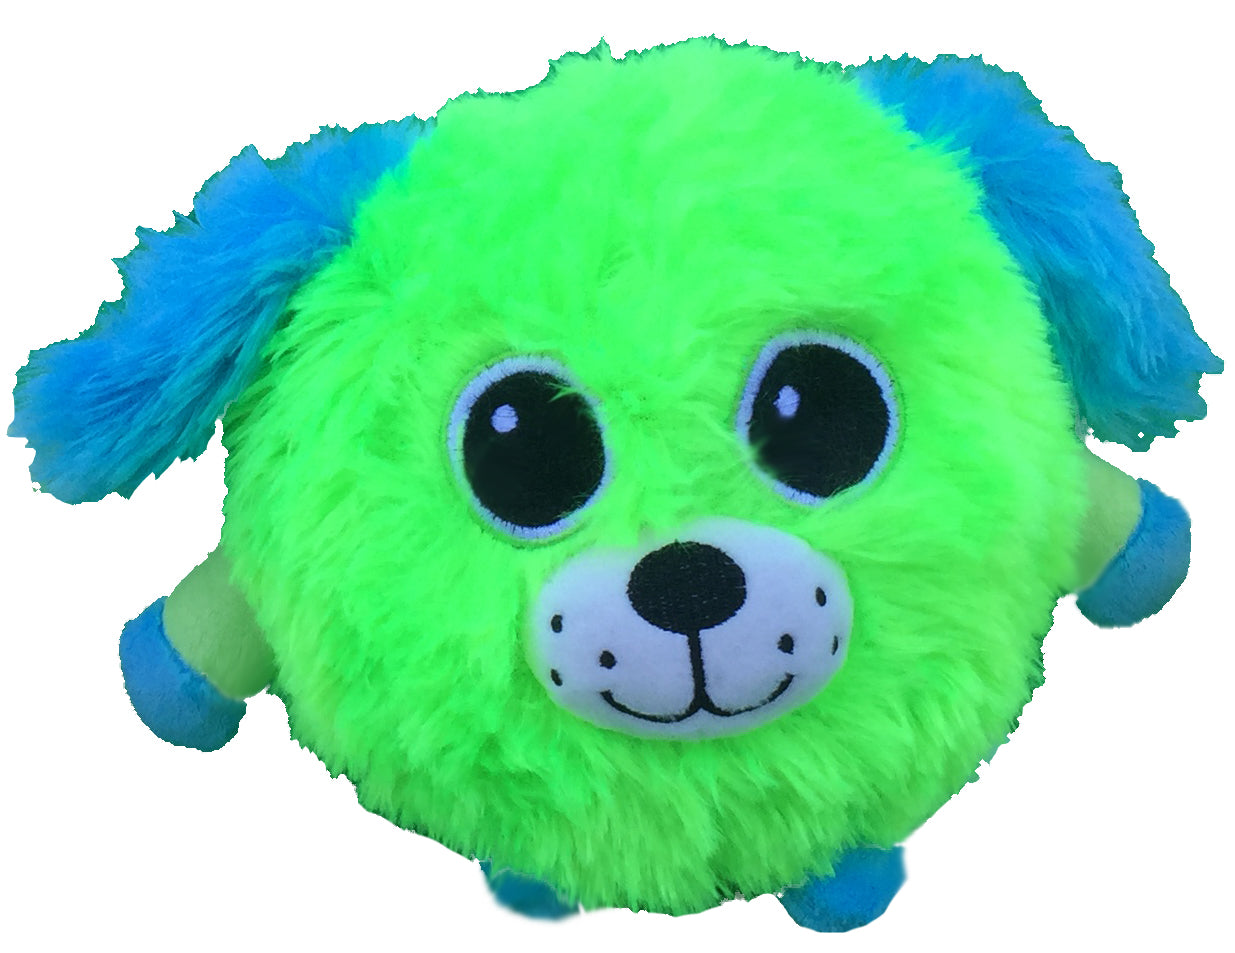 Jooperz Plush Toys - Cutie Punyos - Collect the whole set!